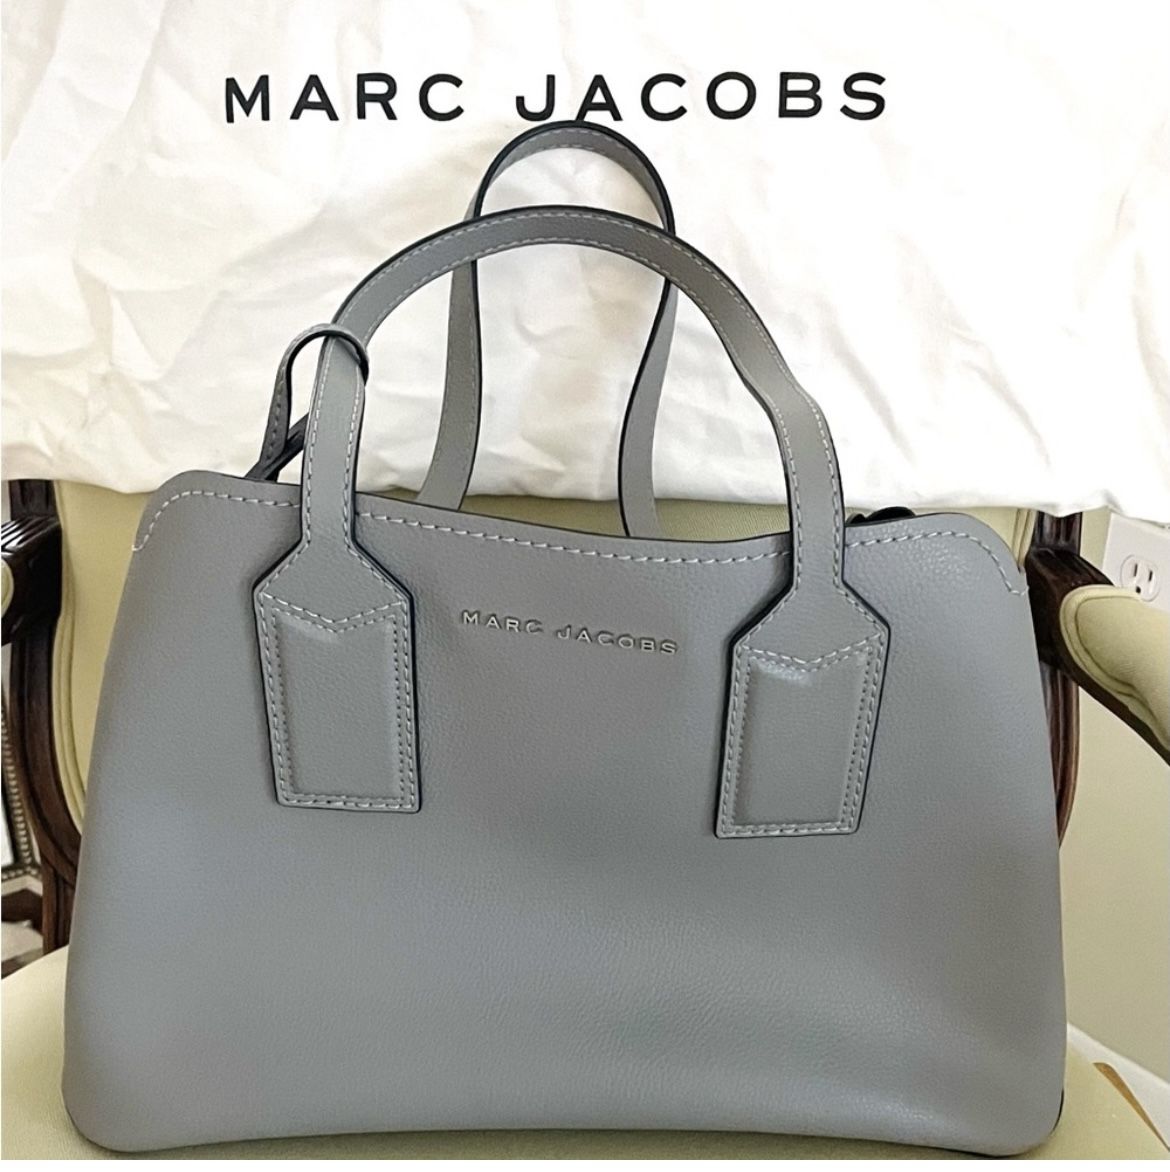 NWOT authentic Marc Jacobs Leather bag